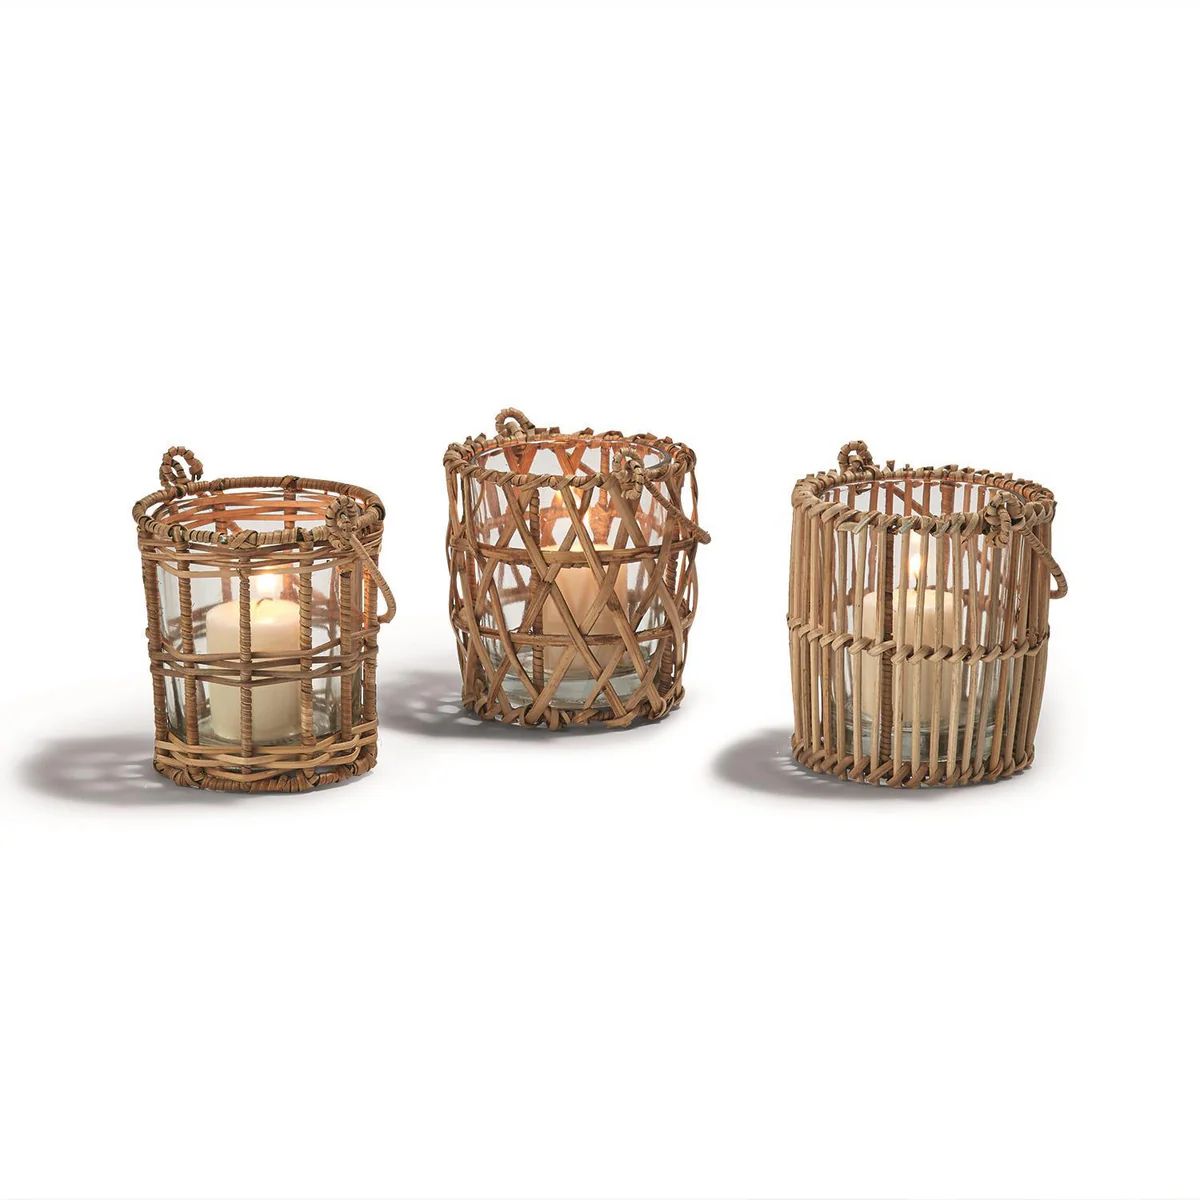 CANE WEAVE LANTERNS | Cooper at Home